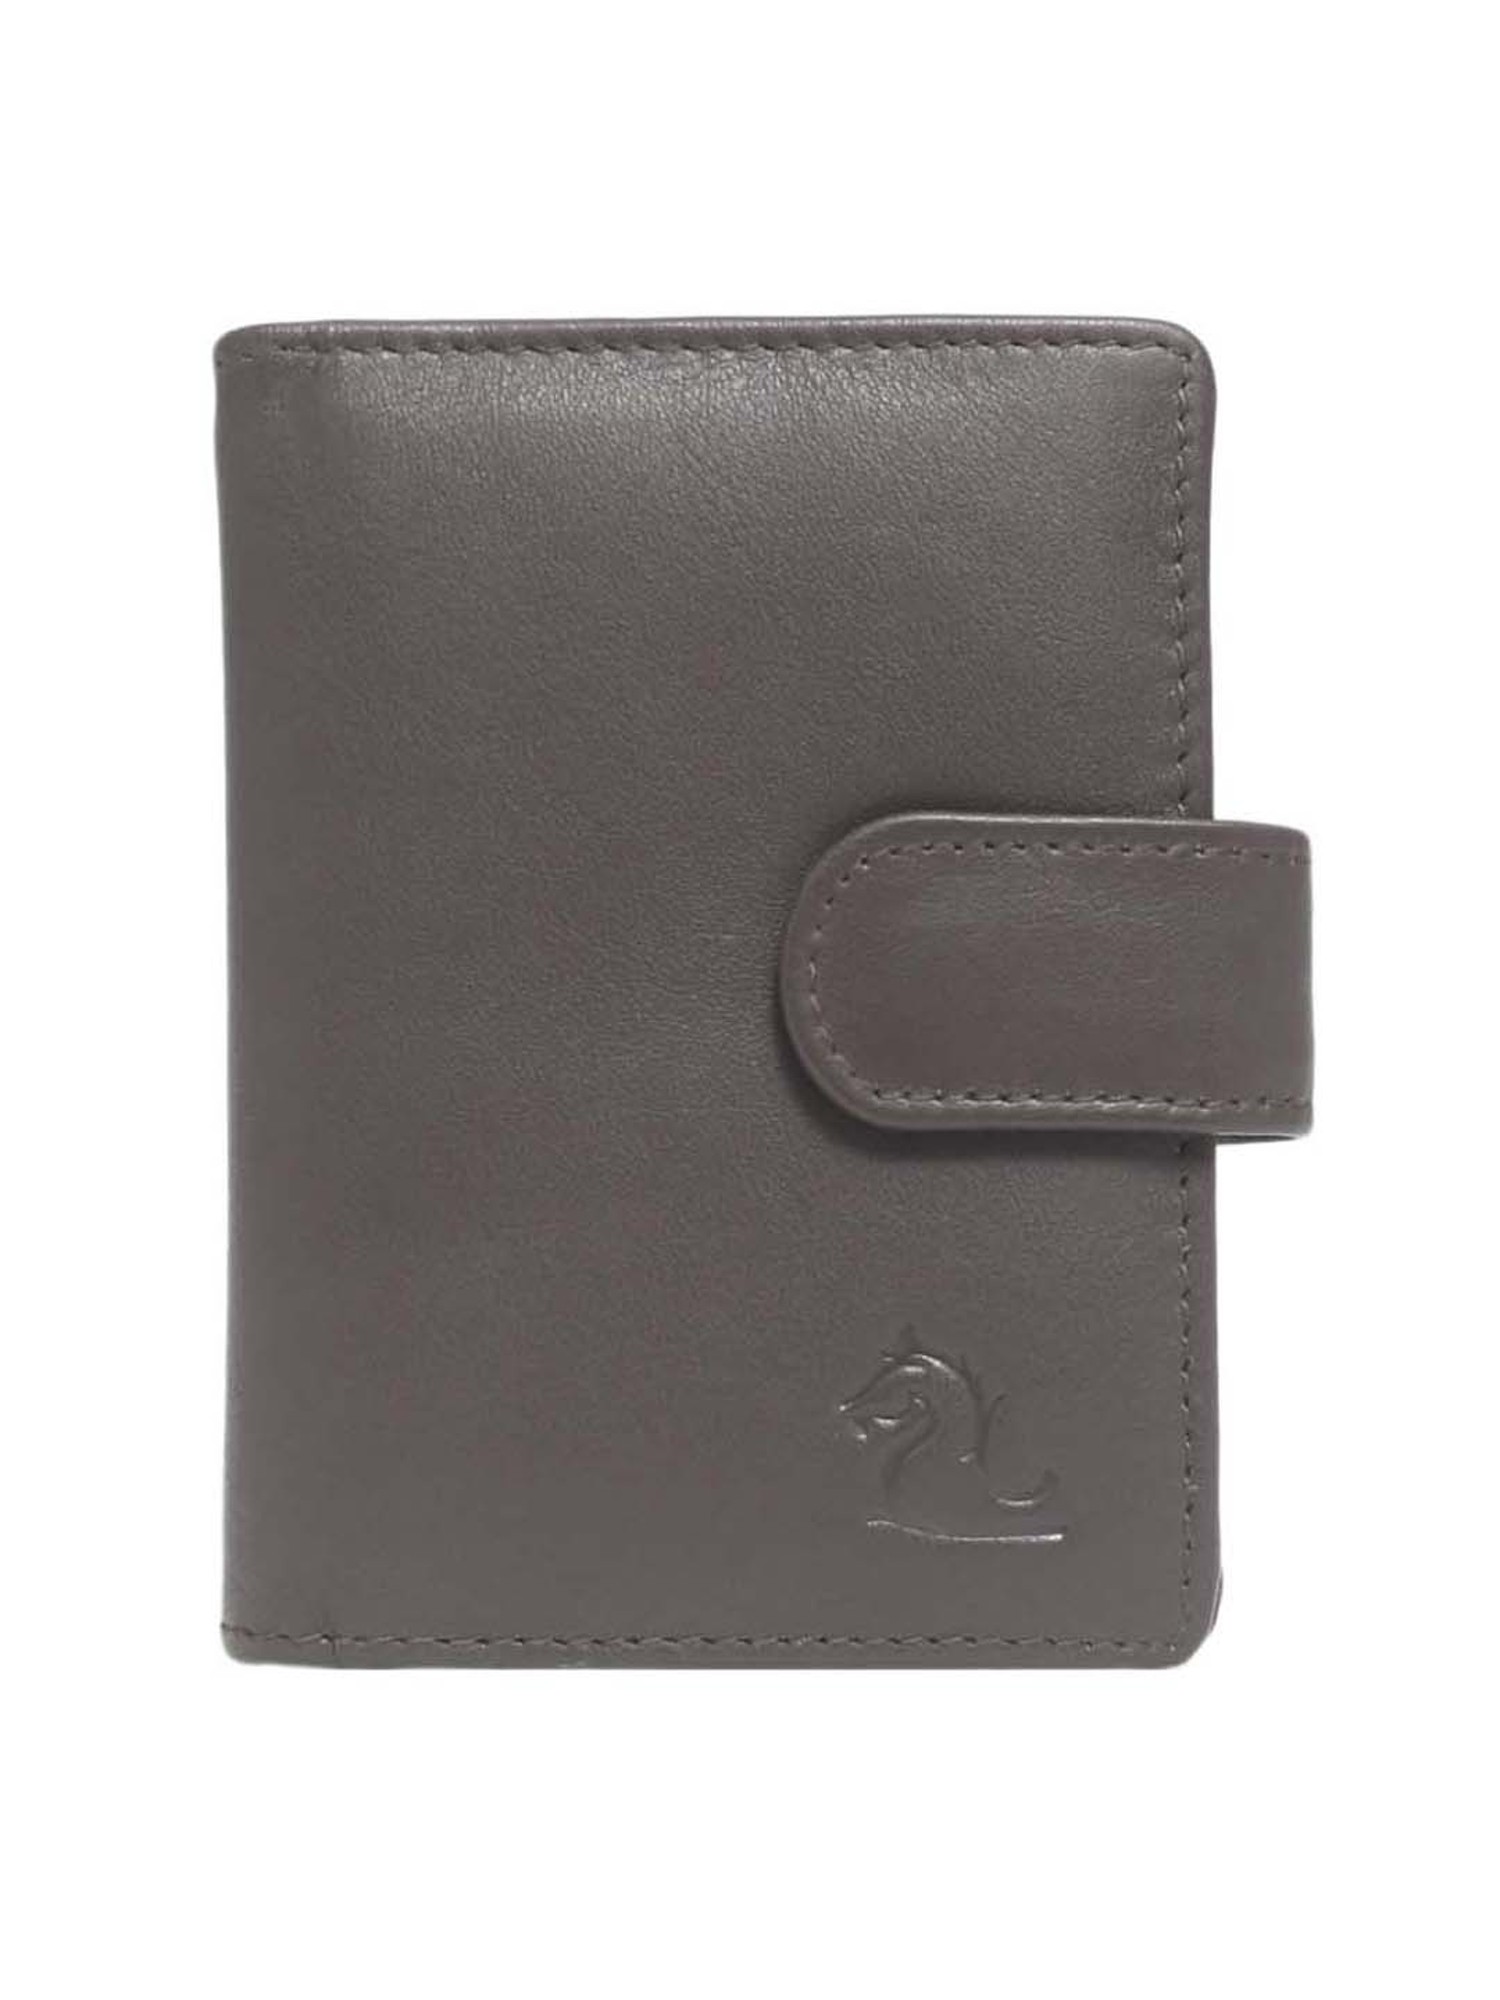 KARA Leather Card holder Tan - sleek card case with Slots for 20 Credit Cards